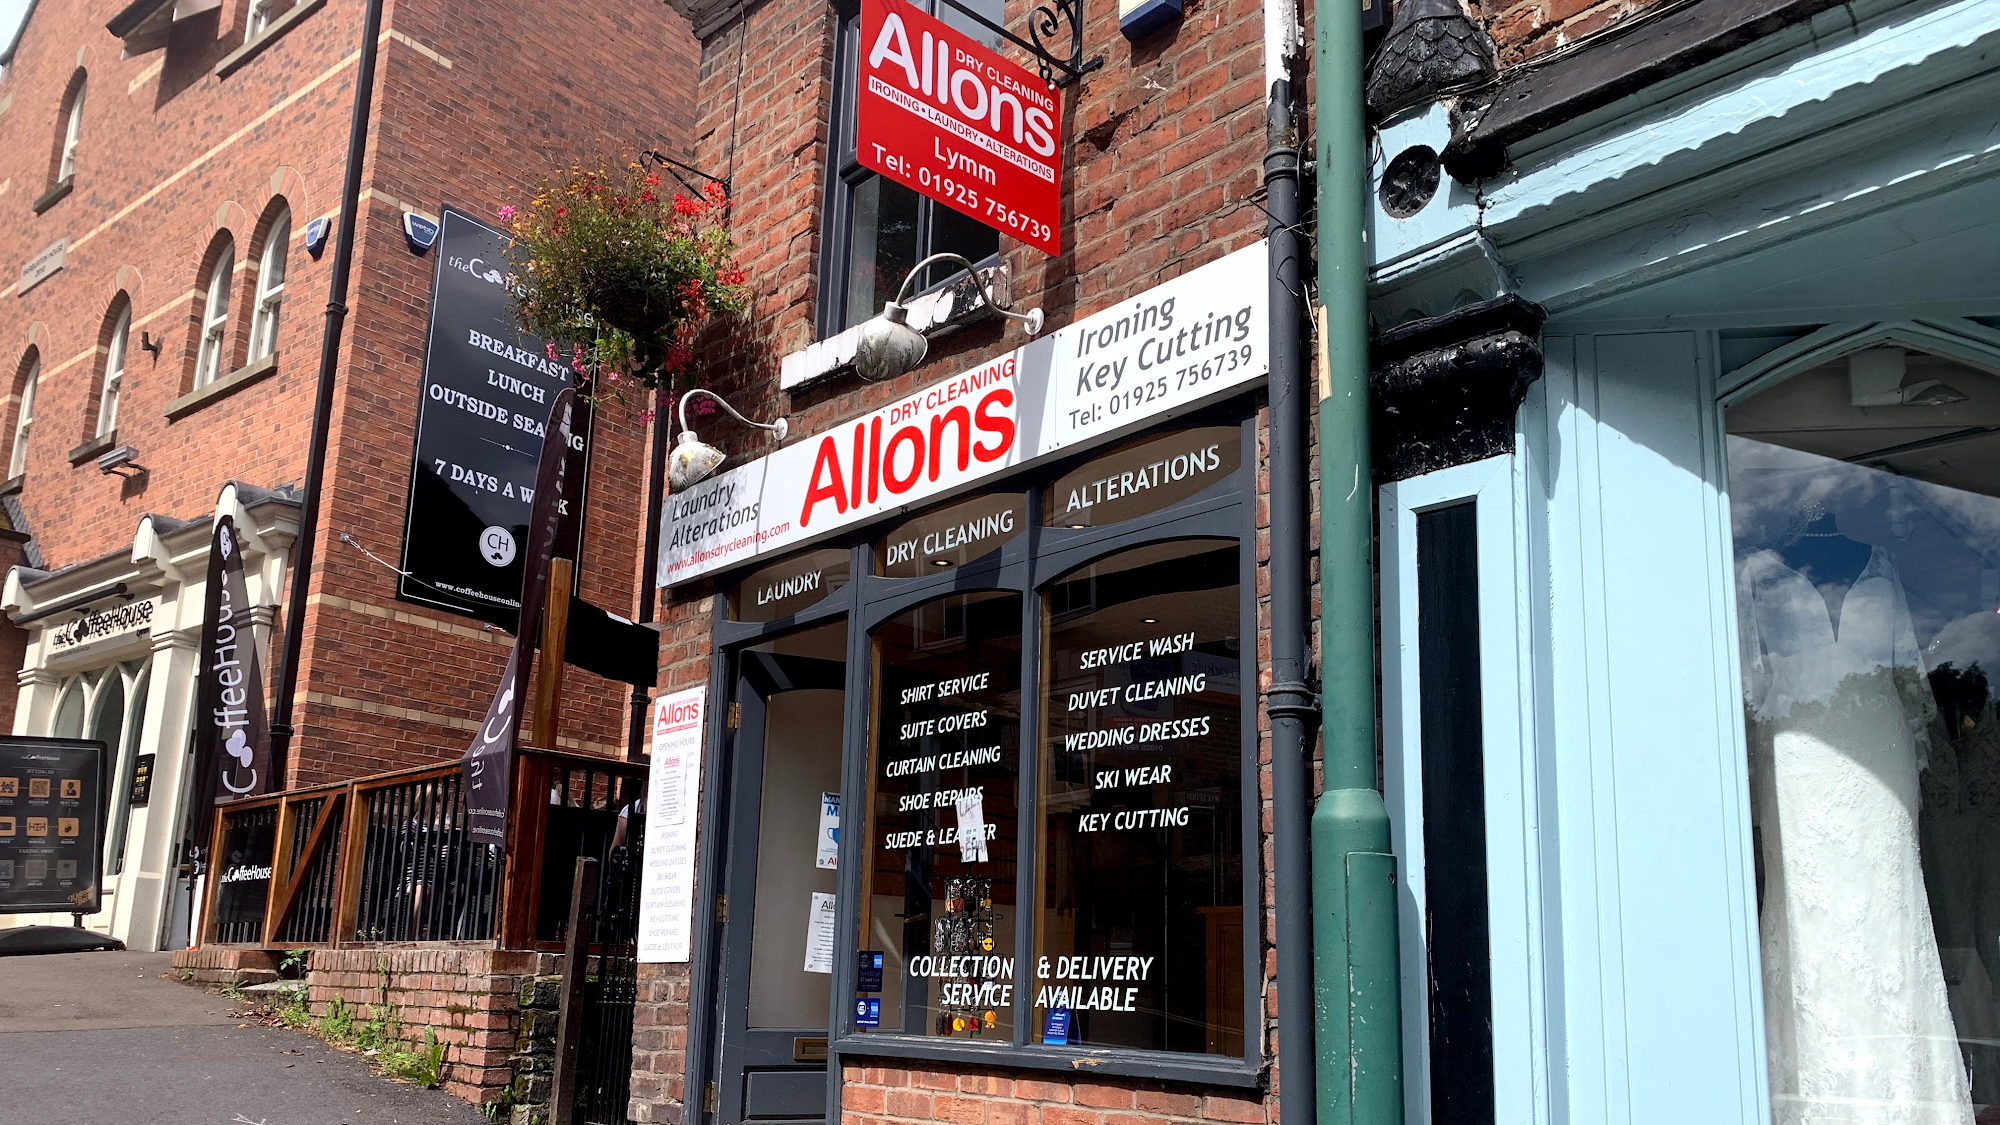 Allons Dry Cleaning (Lymm)